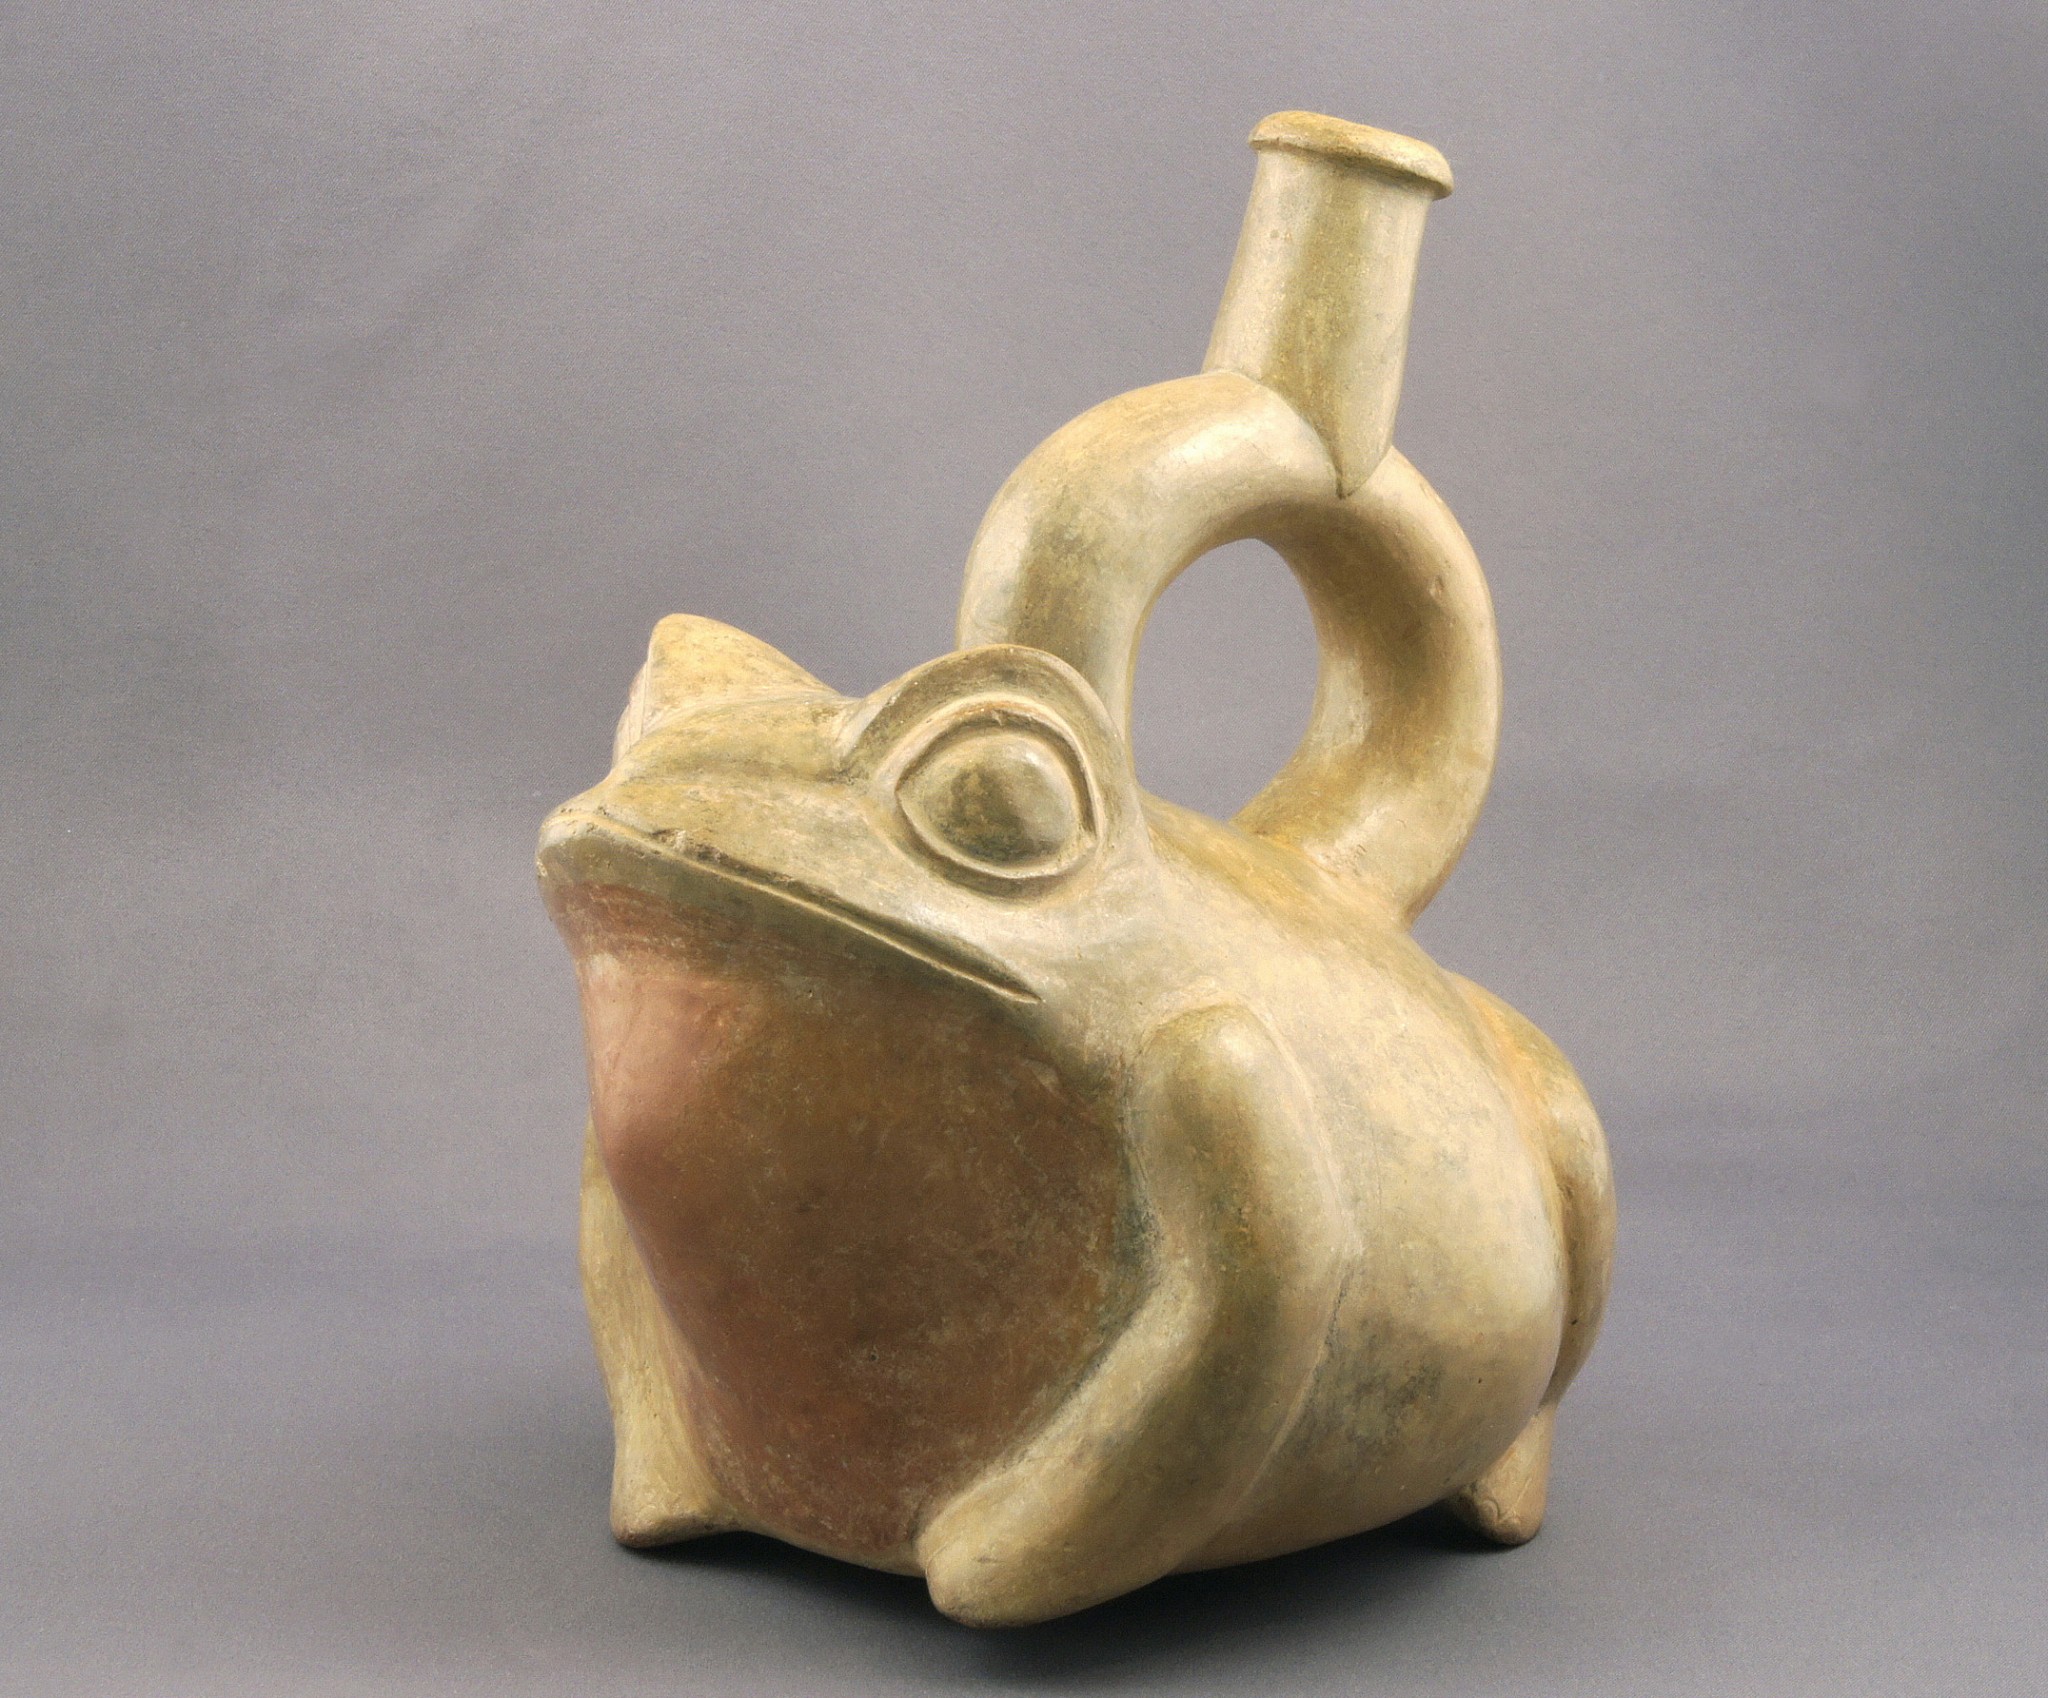 Peru, Moche I Ceramic stirrup-spout effigy of a seated toad in buff with red throat
This stirrup spout vessel depicting a life-like frog/toad attests to the Moche artist's fond awareness of the natural world.  Such careful attention and adeptness at naturalistic portrayals of animal images is common of Early Moche ceramics. Frogs have bulbous eyes, strong,  long webbed feet, and slimy  skin, while toads have stubby bodies, warty, dry skin, different chest cartliage and paratoid glands behind the eyes.  Their large eyes are defined with a ridge.  Also, toads do not have teeth,  while frogs have upper teeth. This rotund fellow with his alert wide-eyed gaze and attentive posture seems all too ready to ambush an unsuspecting fly.  It is slip painted in cream and the head tilts upward, exposing a rosy orange gullet beneath the determined, down-turned mouth. Images of frogs and toads (anurans) are commonly interpreted  in the art of many Pre-Columbian cultures. Because of their musical croaking performances after heavy rains, frogs and toads are associated with water, vegetation , fertility, and in some cases (usually toads), toxicity.  The cyclic quality of their development --the change from the fish-like tadpole to adult frog, allude to a natural affiliation with mythical concepts of transformation.  Similar examples are illustrated in "Pre-Columbian Art of South America", by Alan Lapiner, fig. 281, p129, and in "Moche Art of Peru", by Christopher B. Donnan, fig. 81, p.57. as well as in Ceramics of Ancient Peru by Donnan, 1992, UCLA, p. 128.
Media: Ceramic
Dimensions: Height: 7" x Width: 5"
$5,400
98439